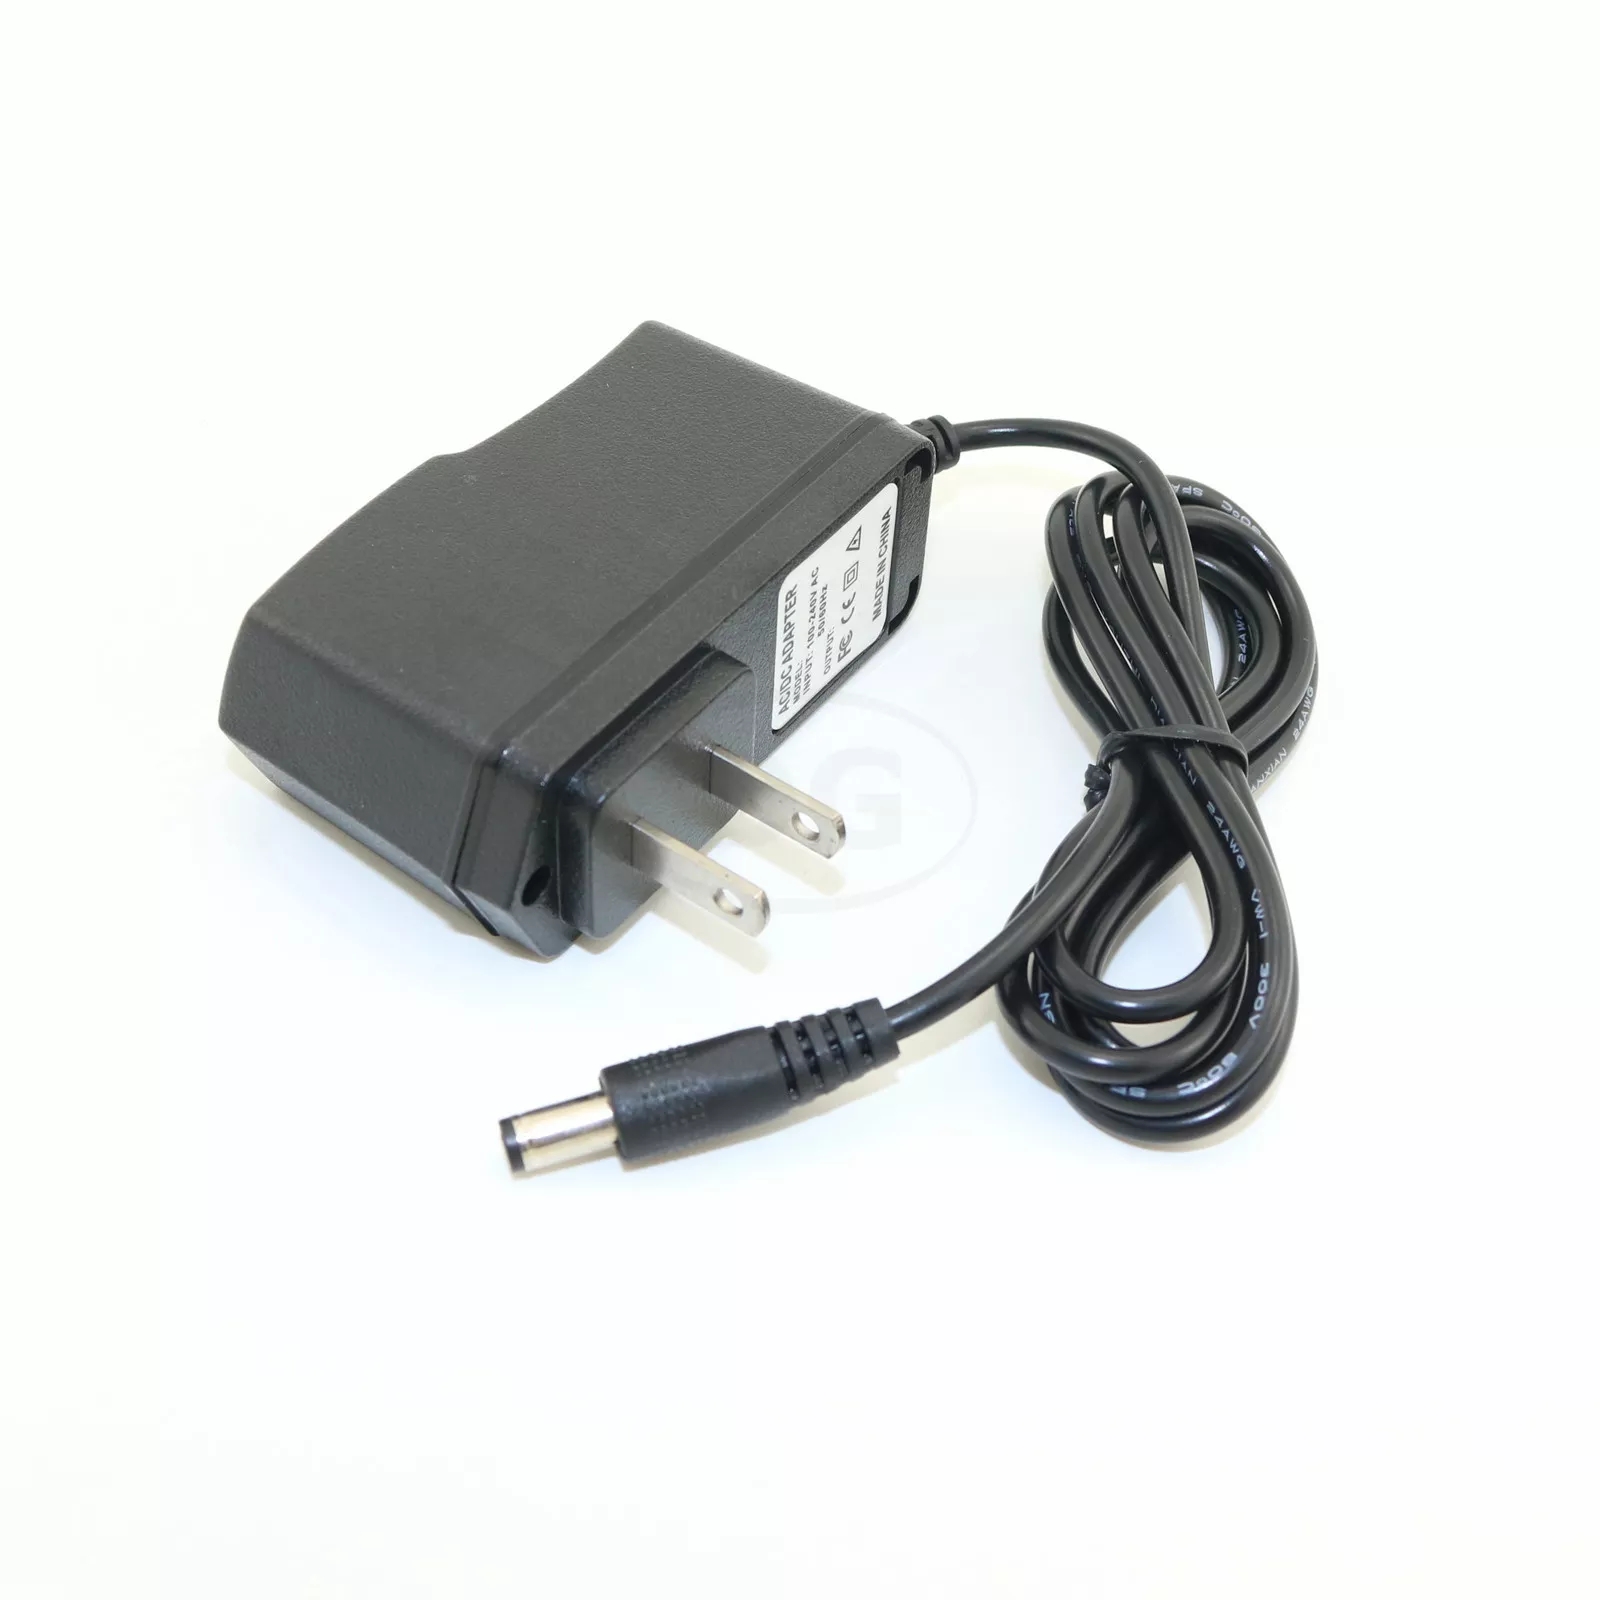 *Brand NEW*9 Volt AC ADAPTER For Casio CTK631 CTK-631 CTK700 CTK-700 Power Supply - Click Image to Close